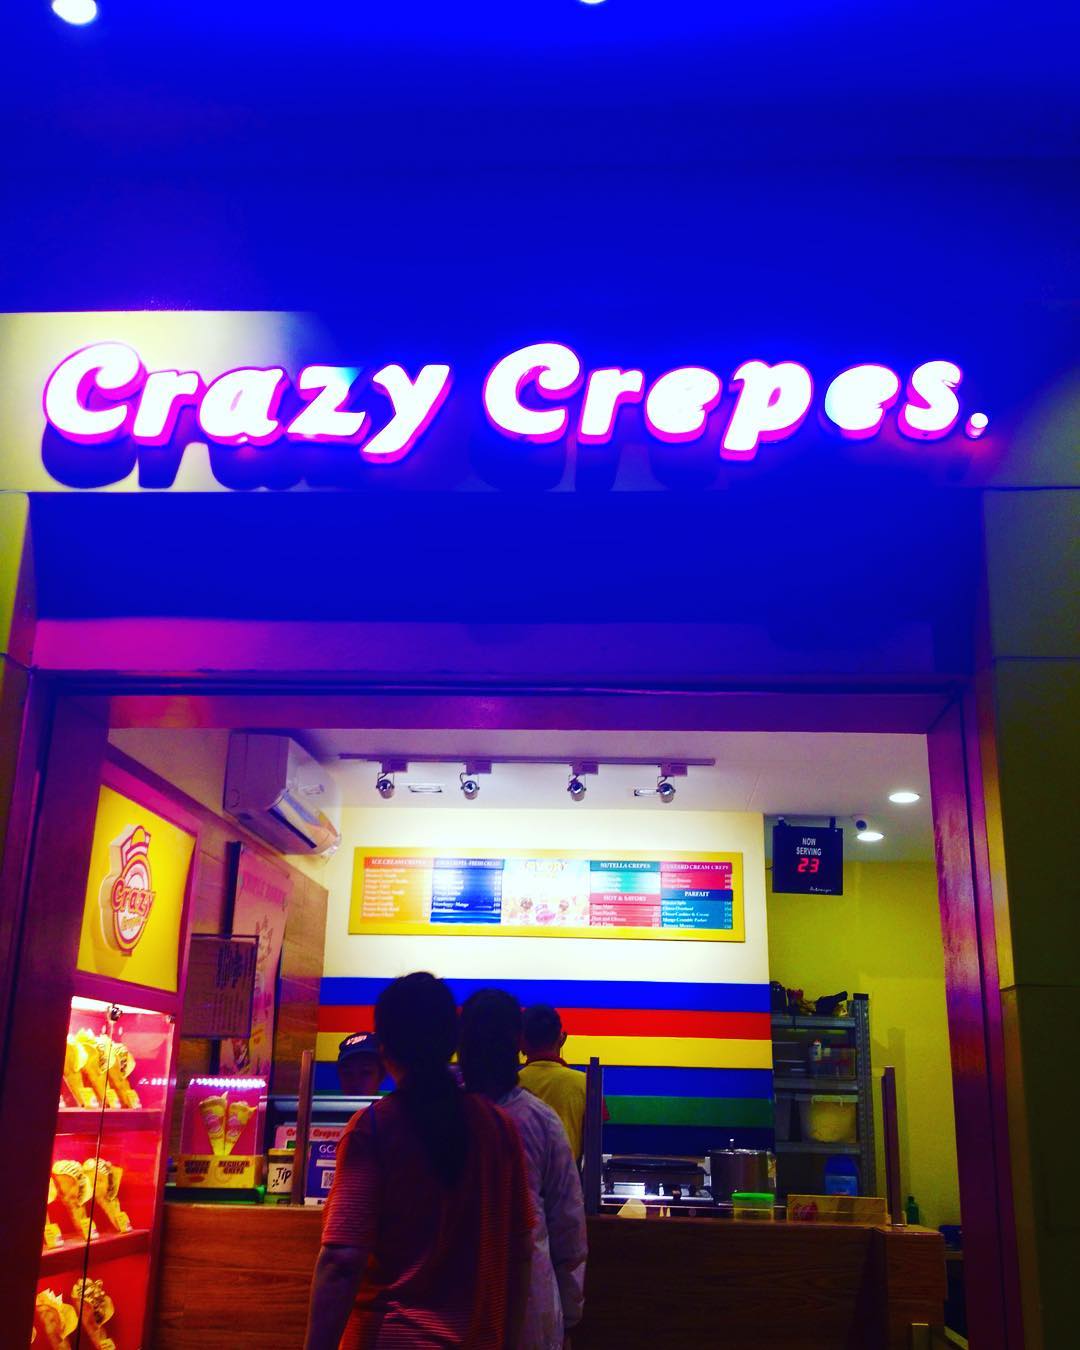  Crazy Crepes  Makes Their Debut in Canada  Dine Magazine